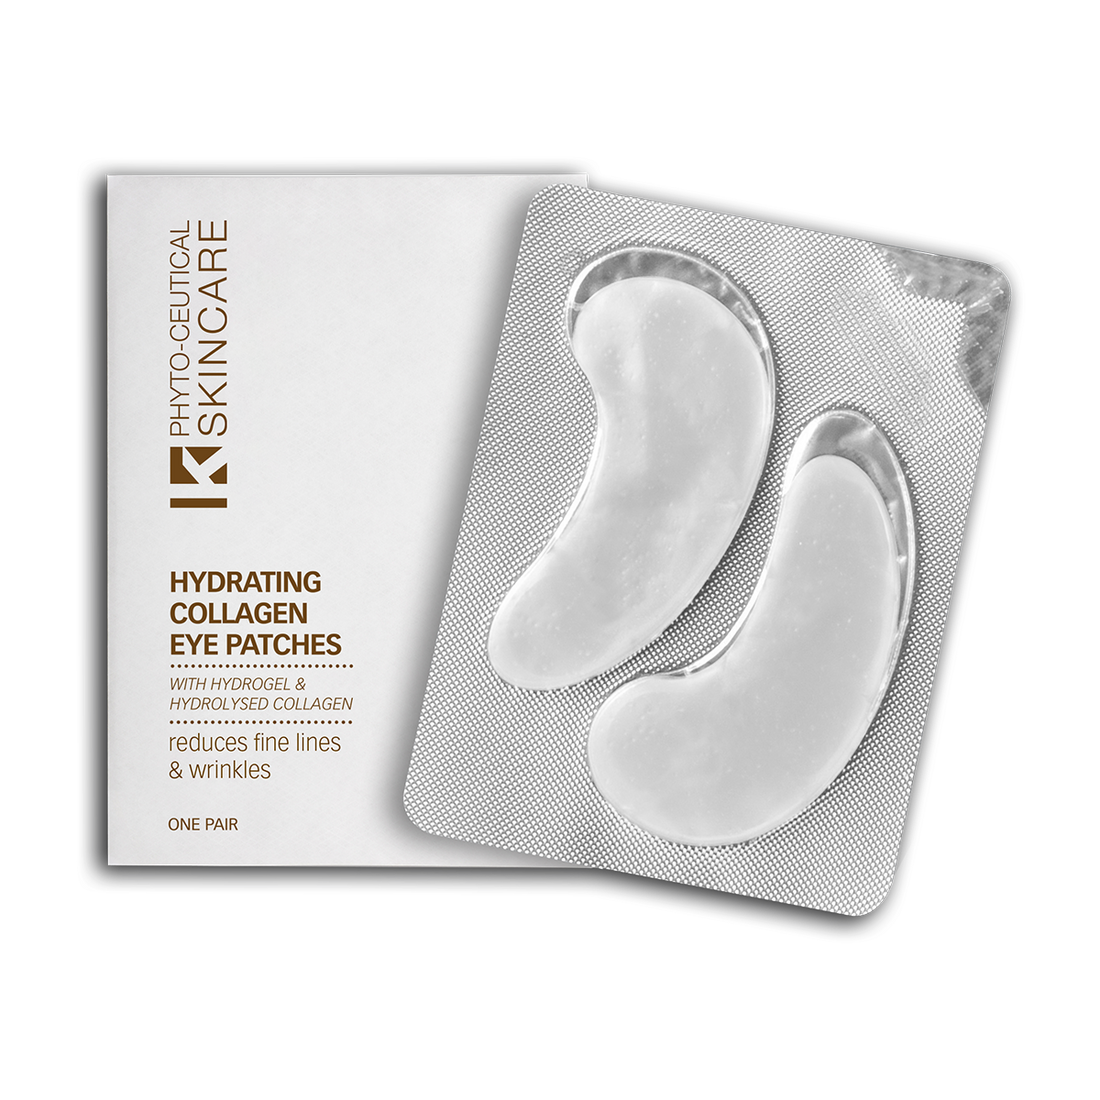 Hydrating Collagen Eye Patches